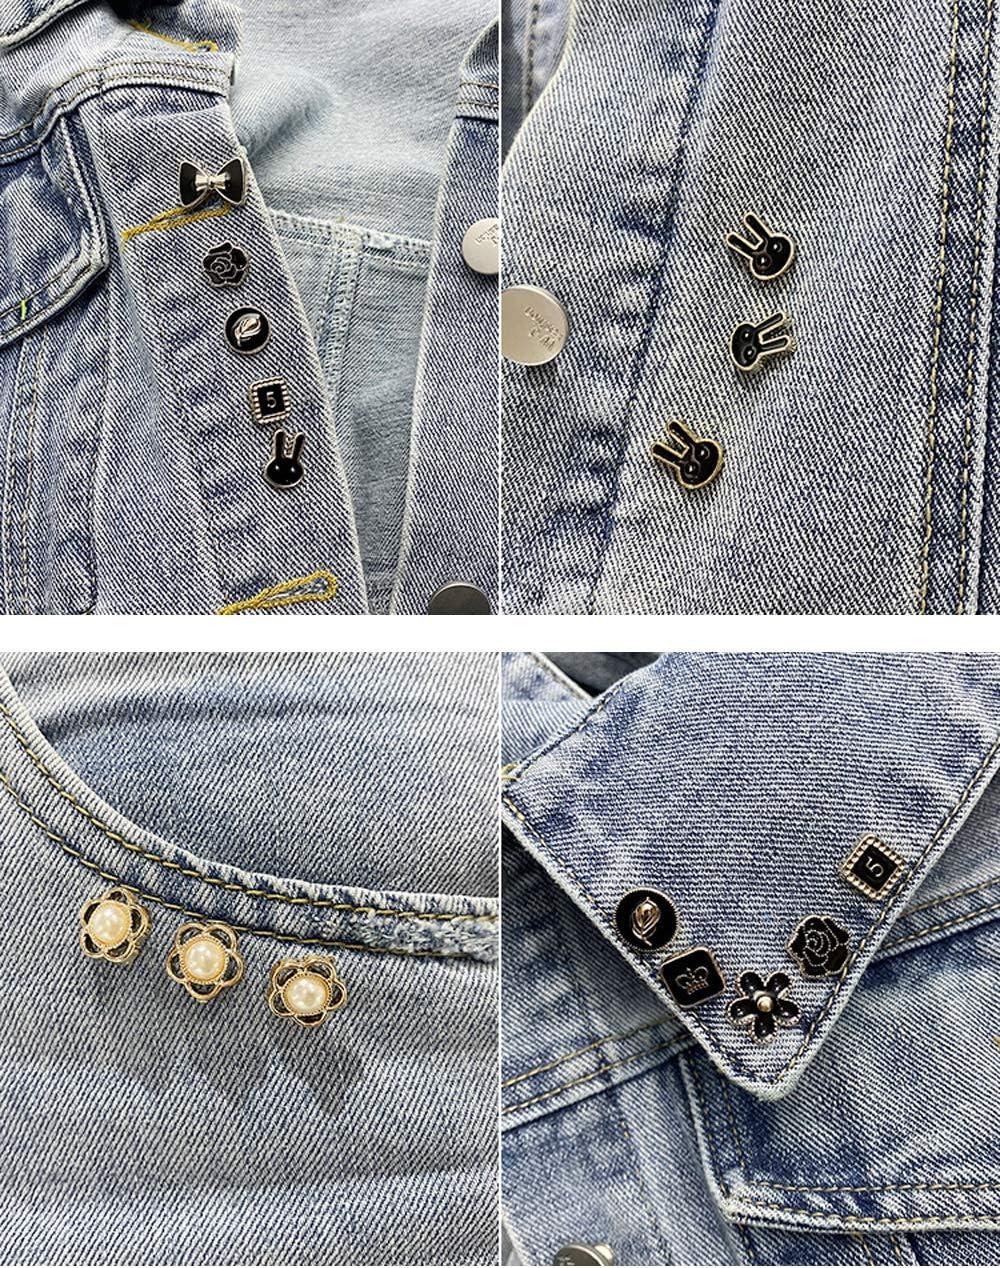 Safety Brooch Buttons, Button Pins Brooch Pins For Clothes For Women Shirt  Prevent Clothes Cardigan 10 Pcs